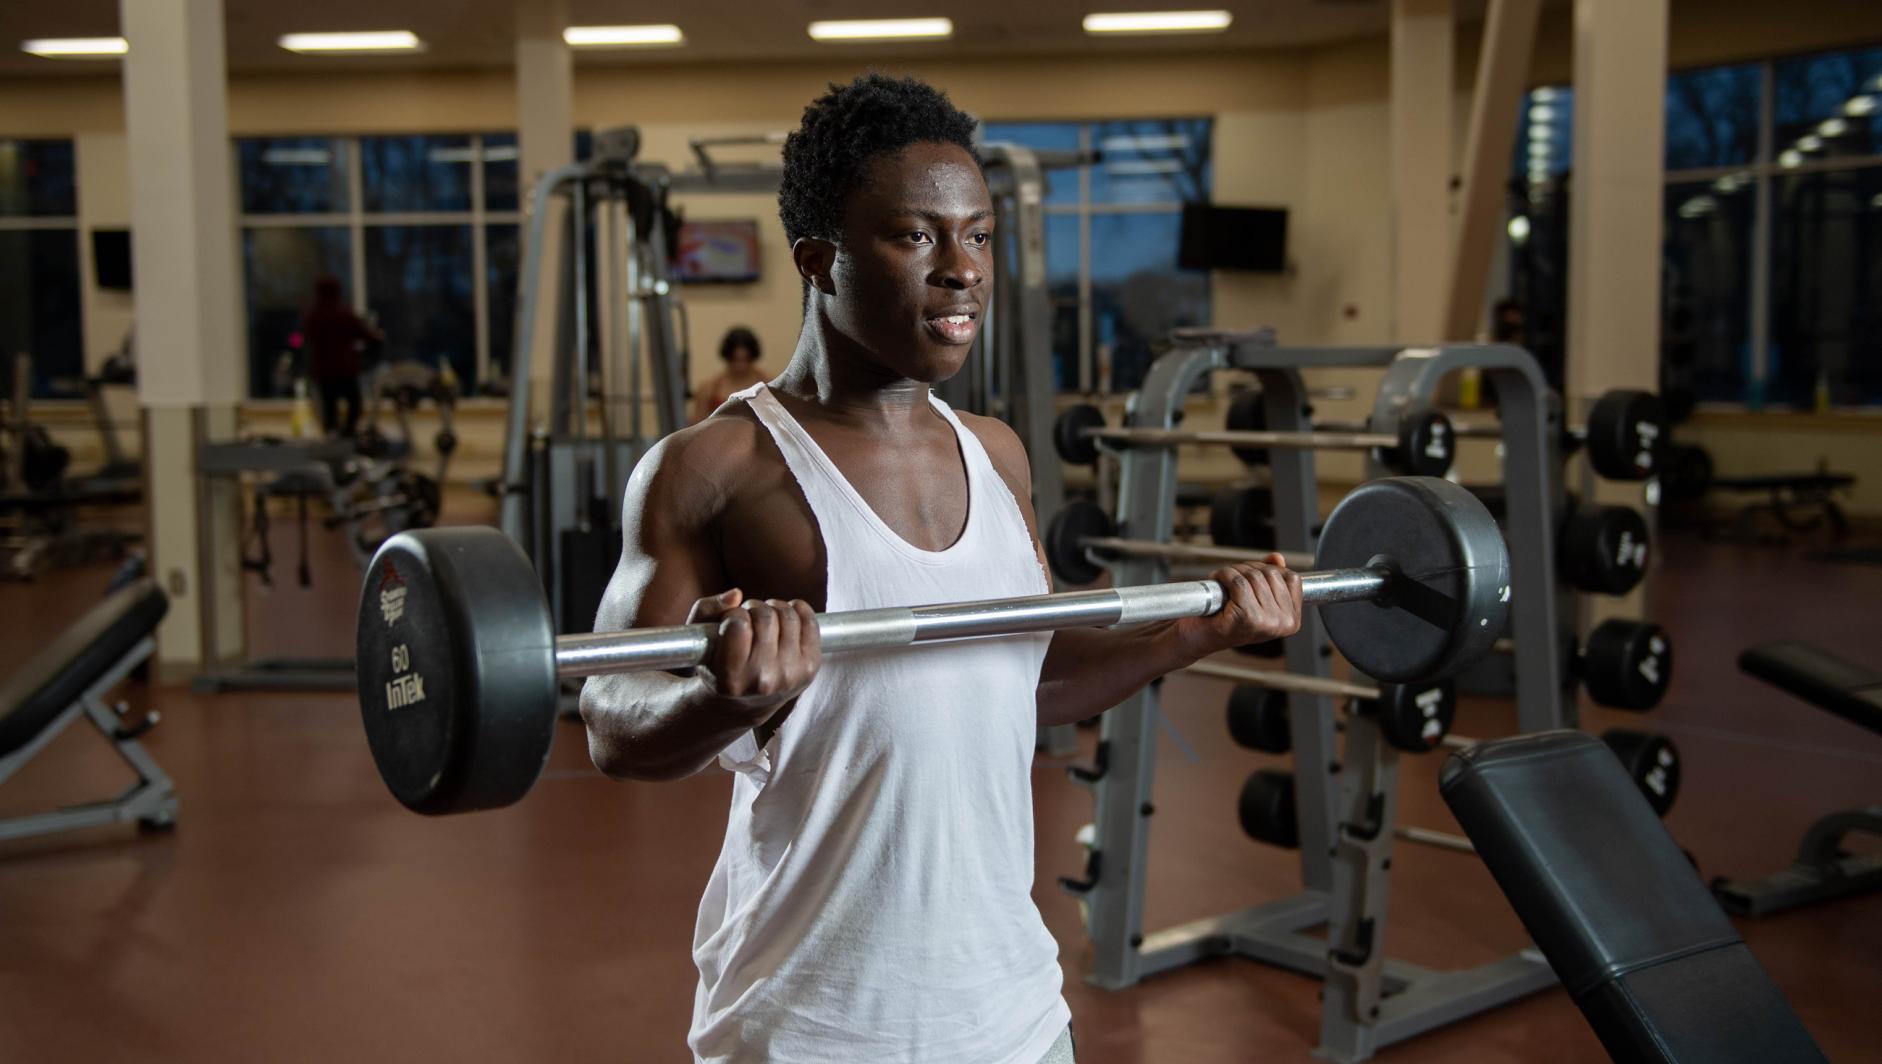 Springfield College students workout at the Wellness Center on Thursday, March 10, 2022.